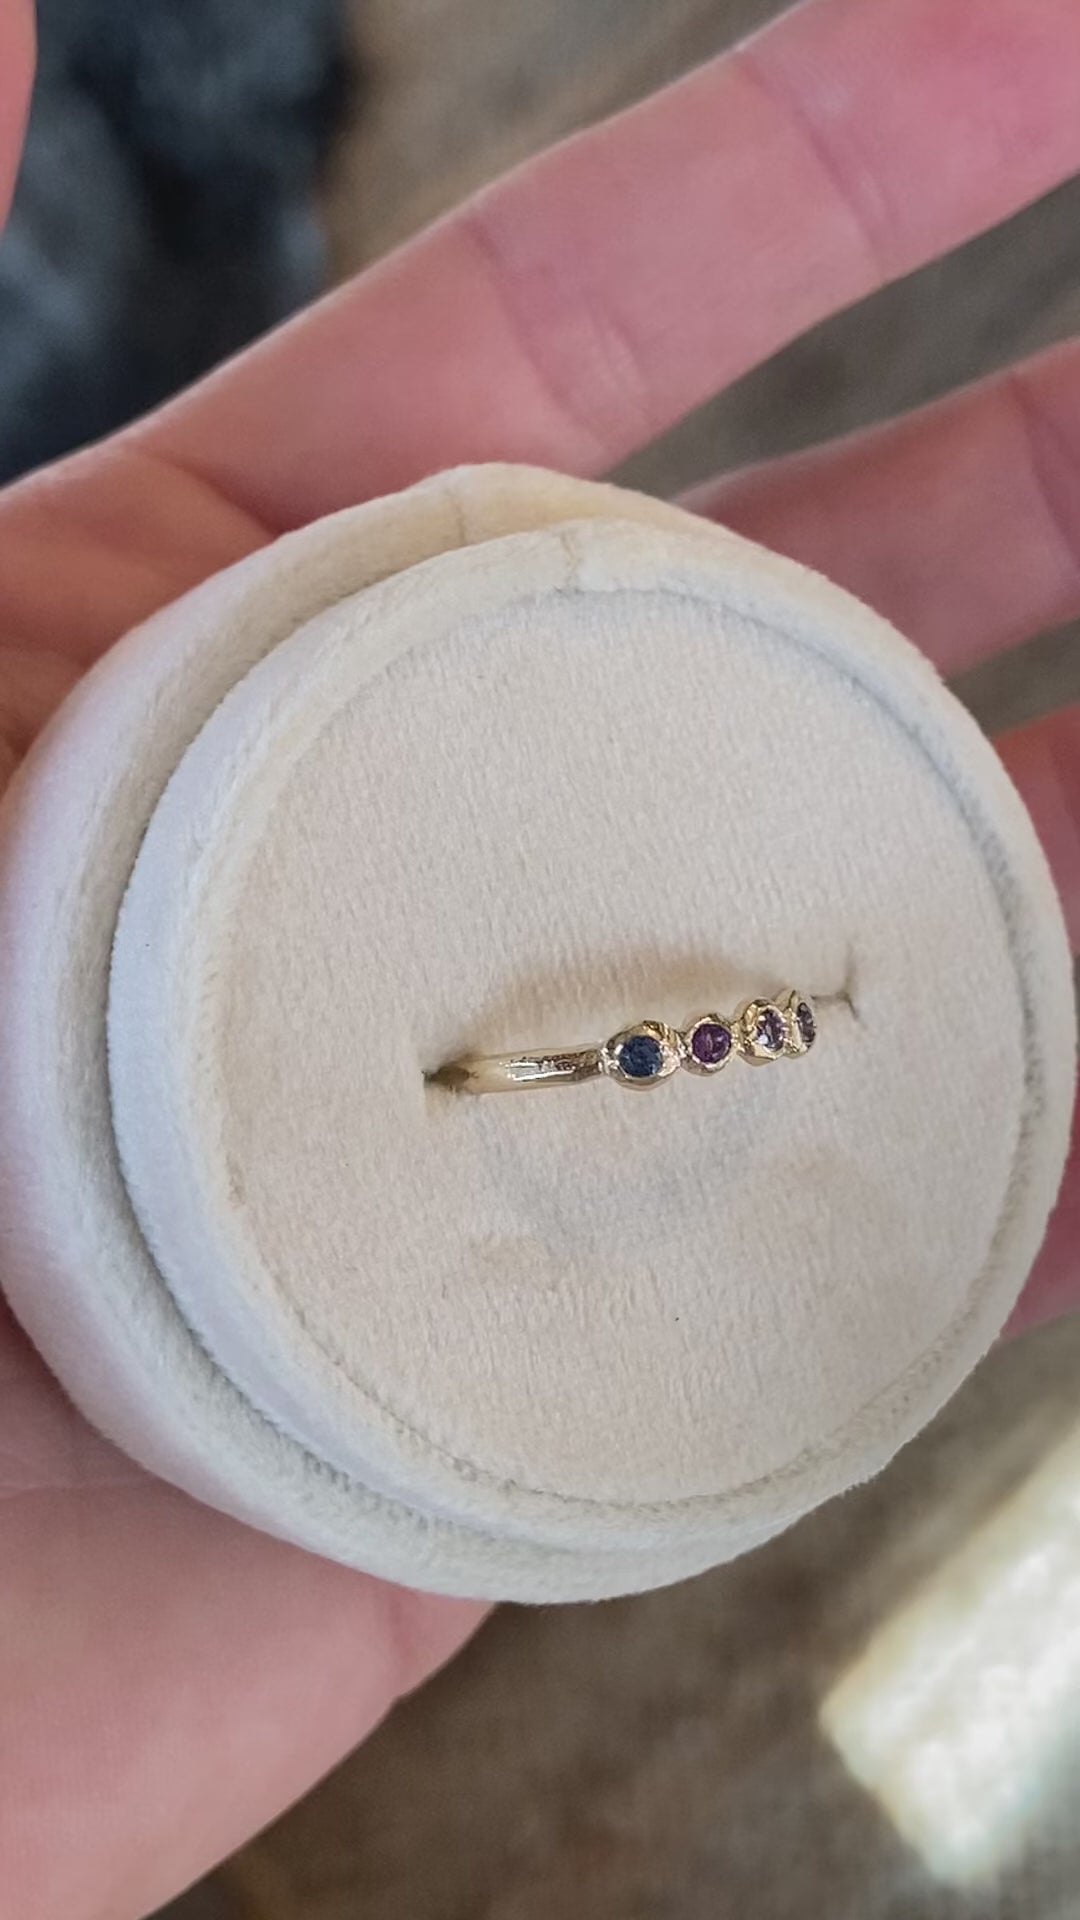 video of four birthstone ring with blues and purple colored stones